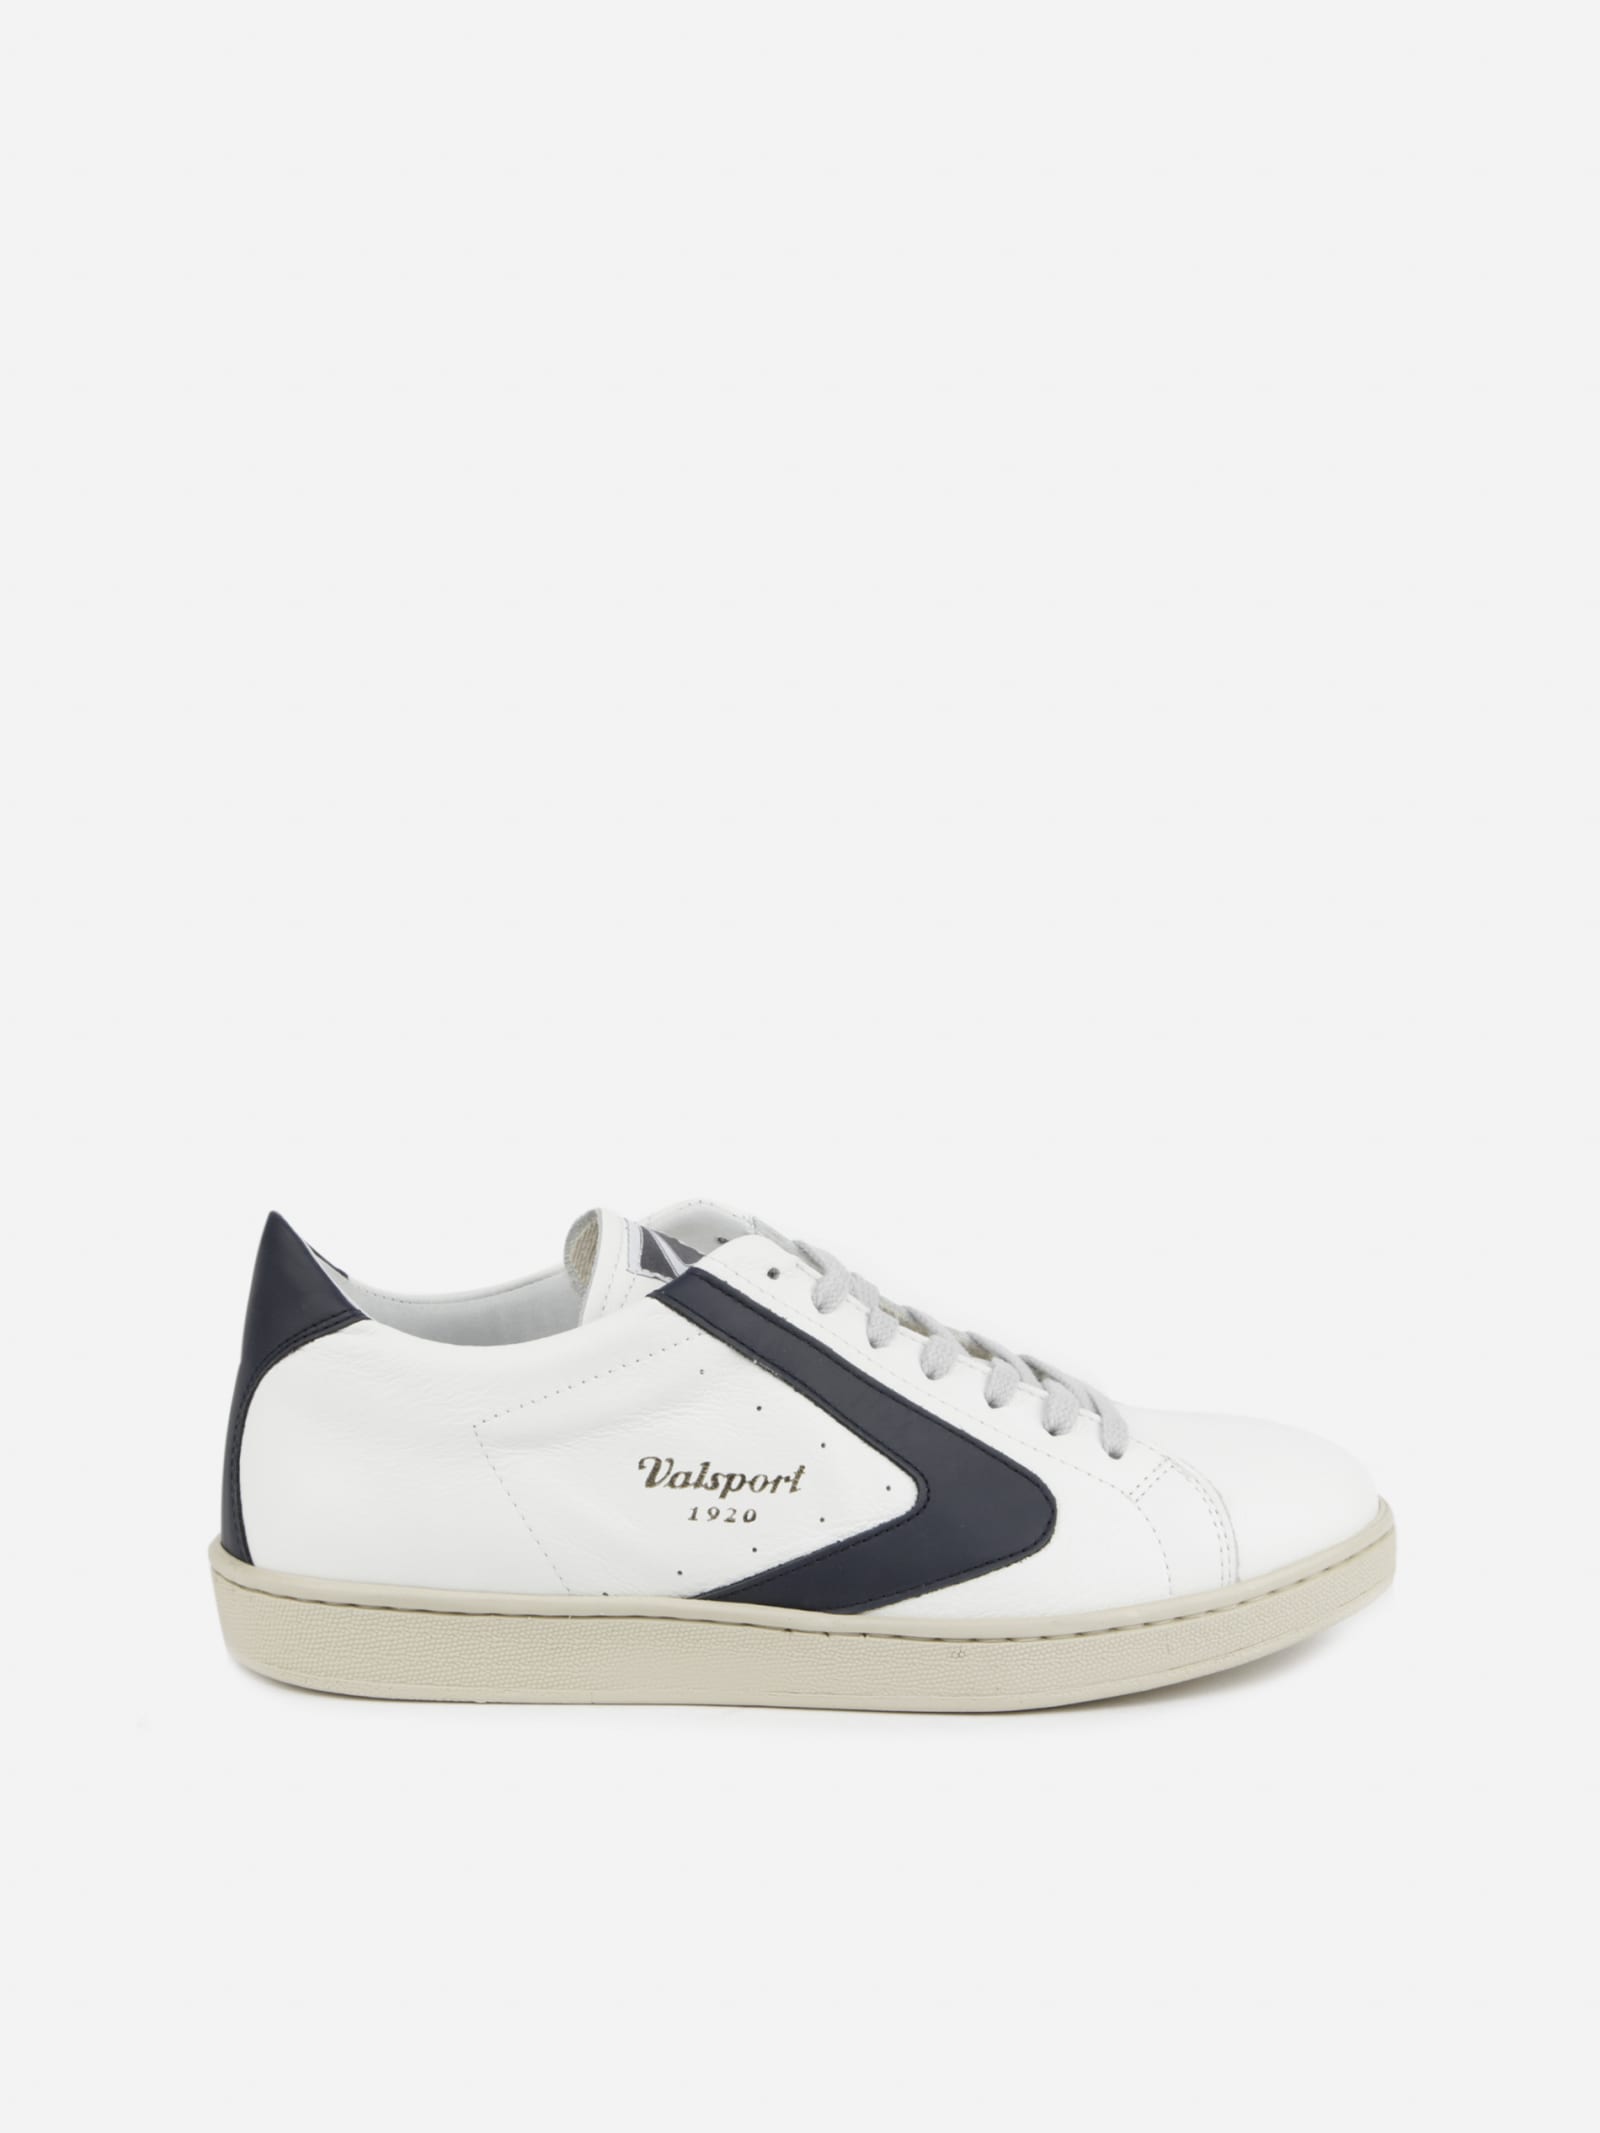 Valsport Leather Sneakers With Contrasting Inserts